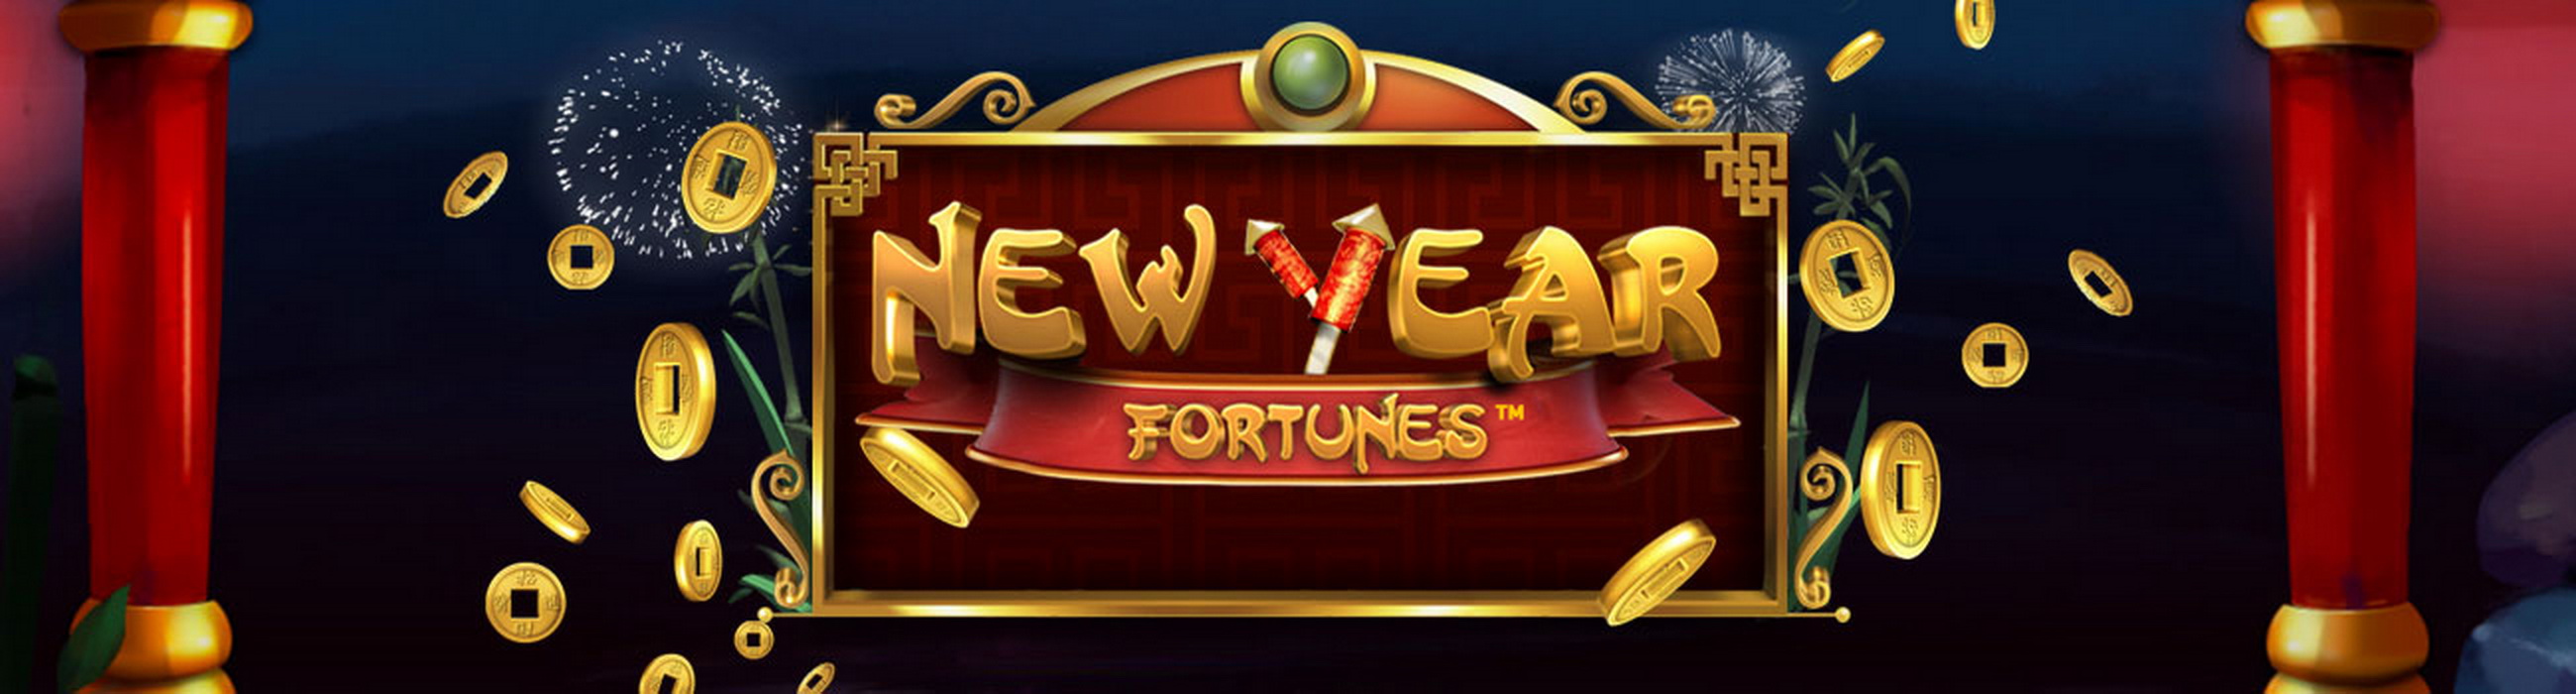 New Year Fortunes